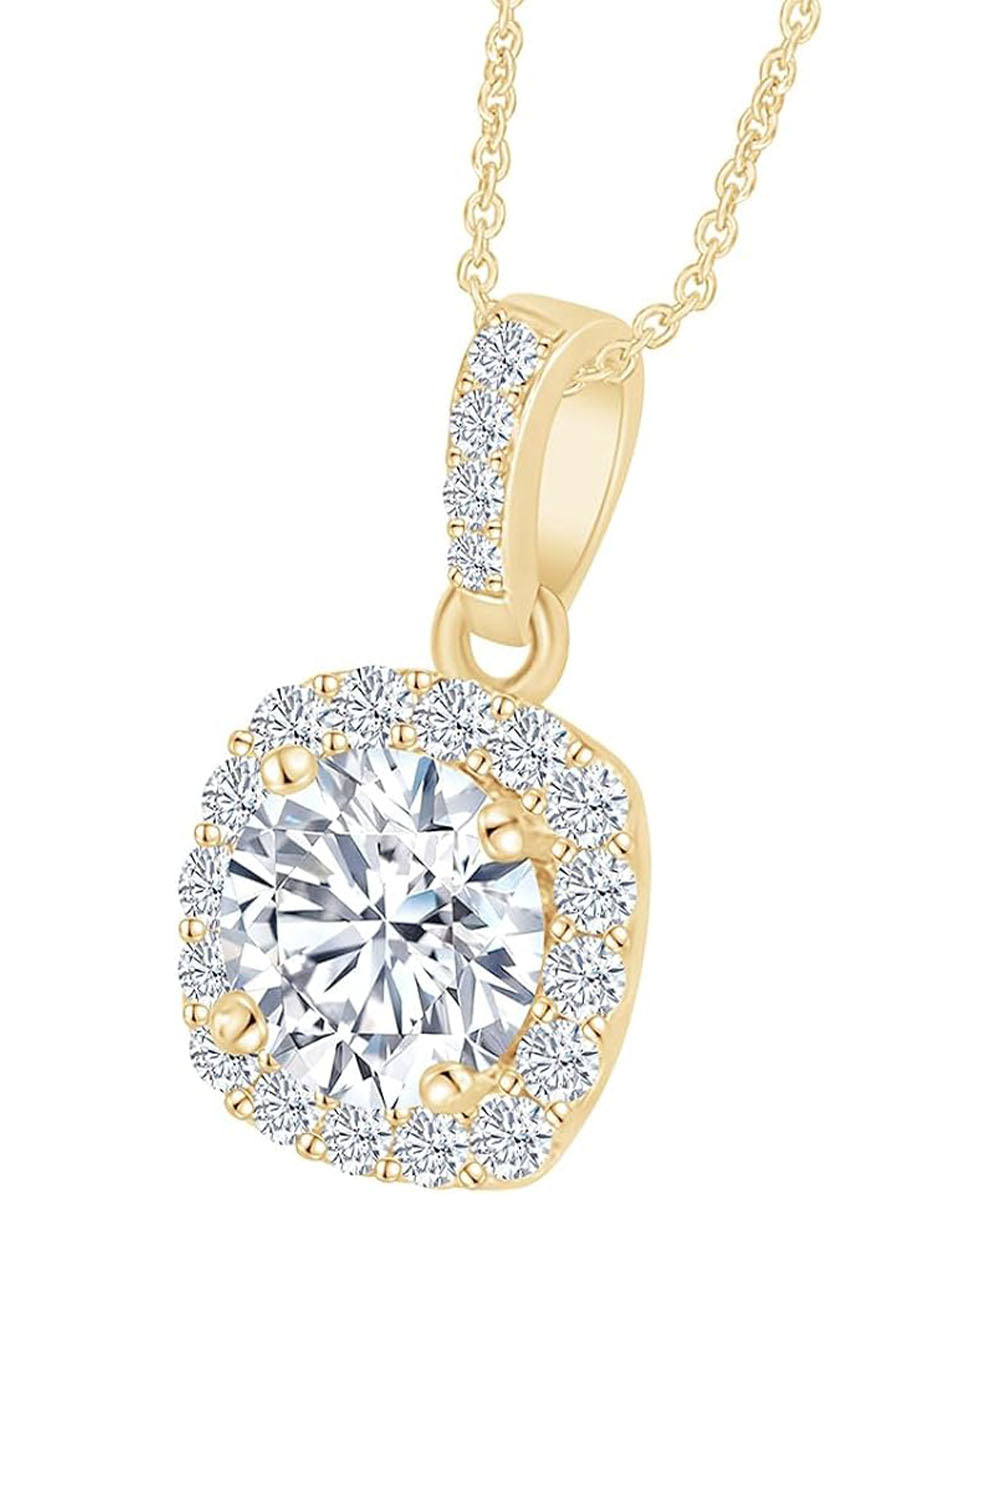 Yaathi 1 Carat Moissanite Diamond Cushion Halo Pendant Necklace in 18K Gold Plated Sterling Silver.